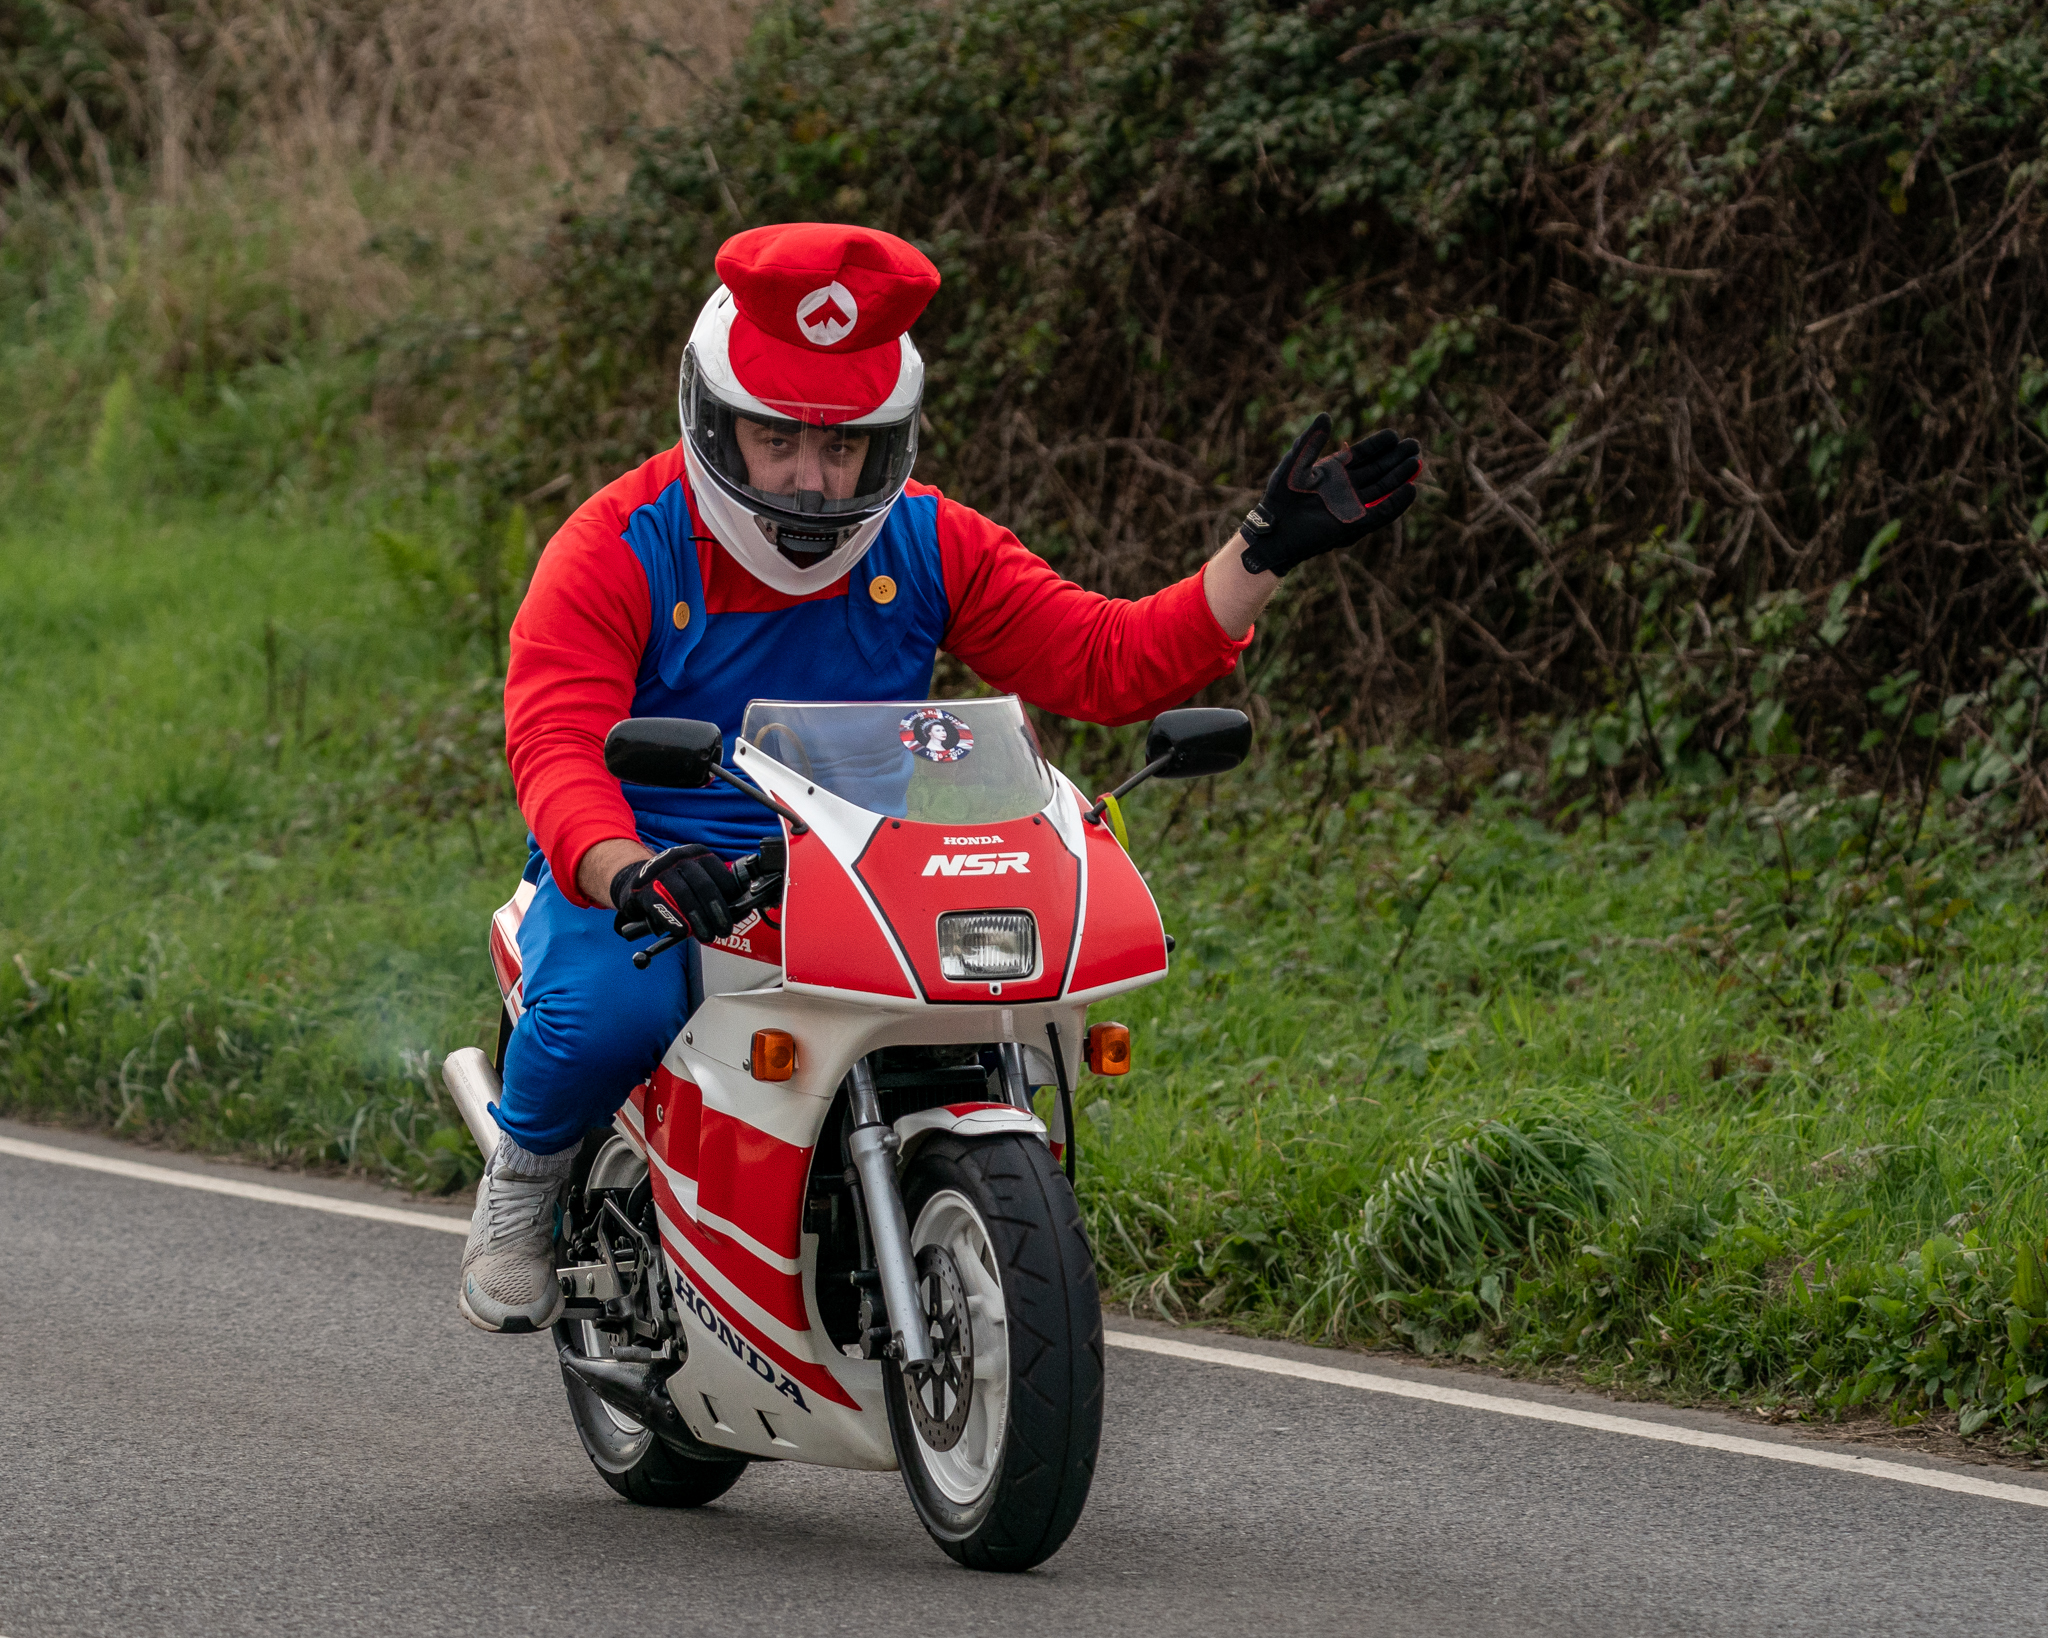 A Super Mario inspired outfit Picture: Stephen Crawford Davies